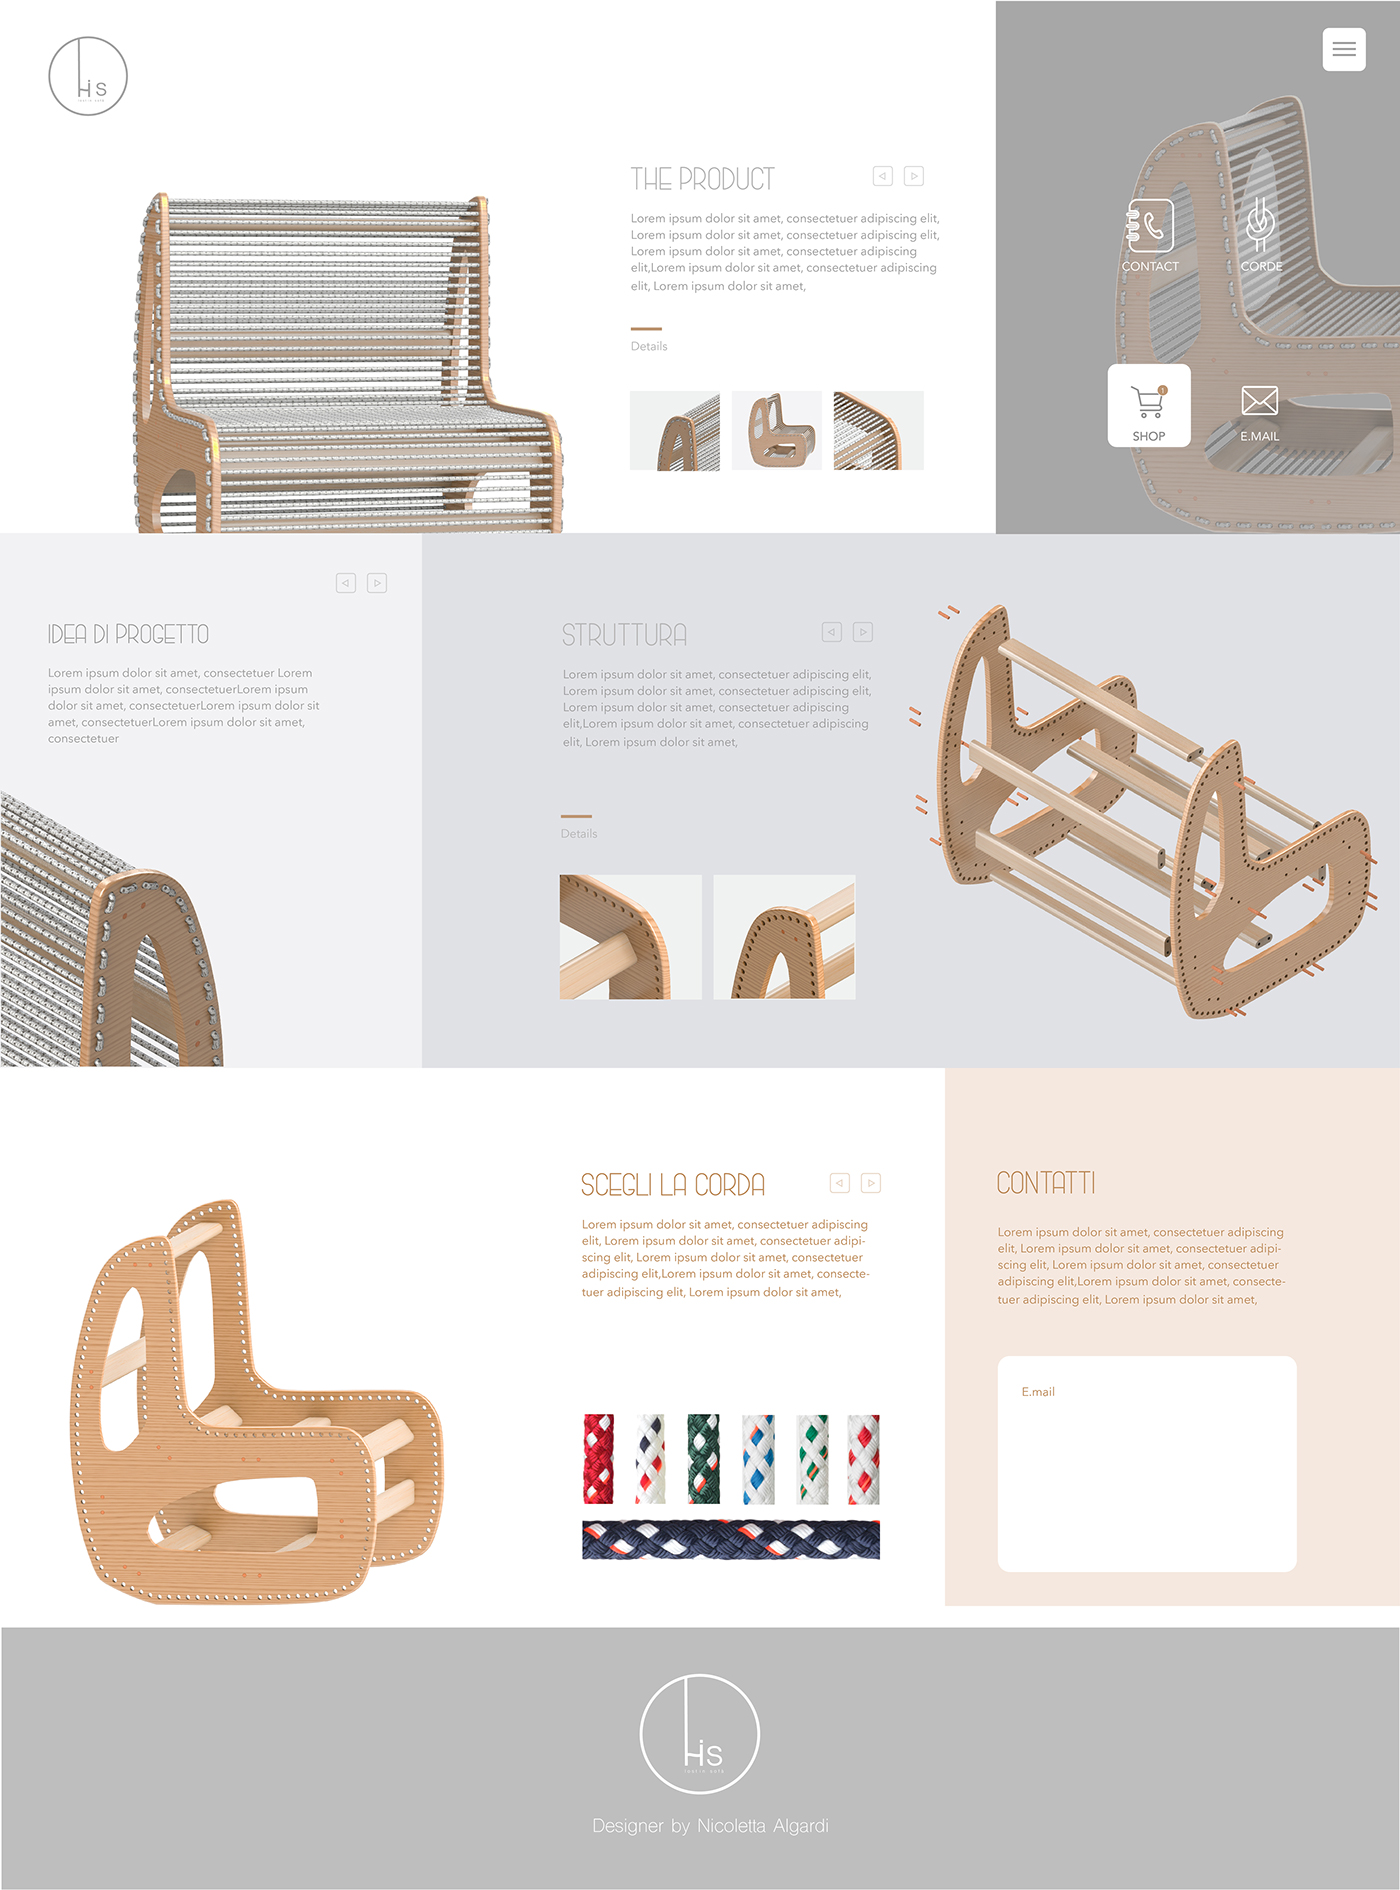 #architecture chair graphicdesign interfacedesign uxdesign ideation wood seat deckchair sofa